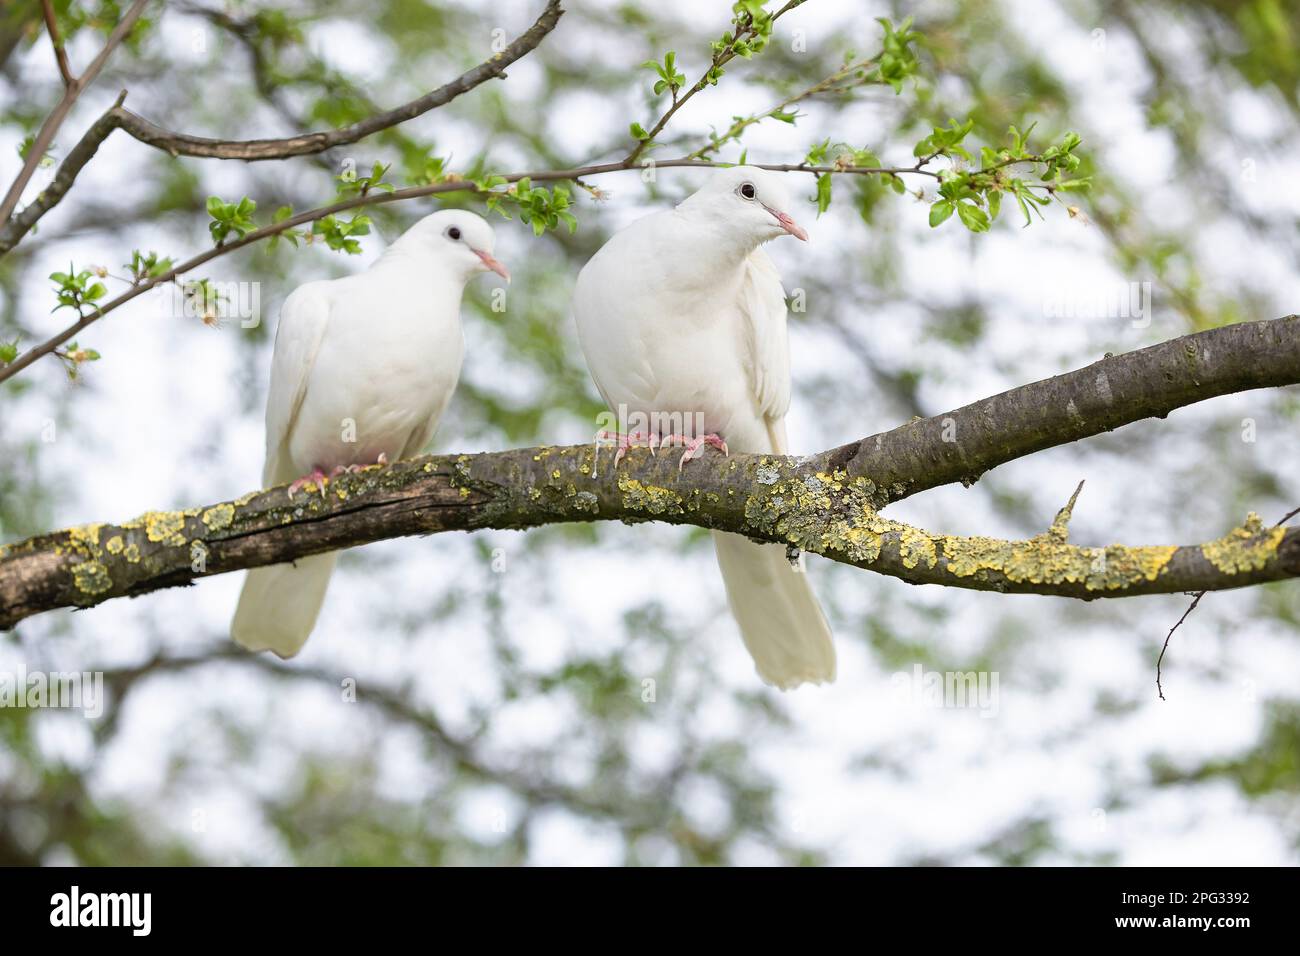 Domestic pigeon. Two white pigeons perched on a branch. Camargue, France Stock Photo